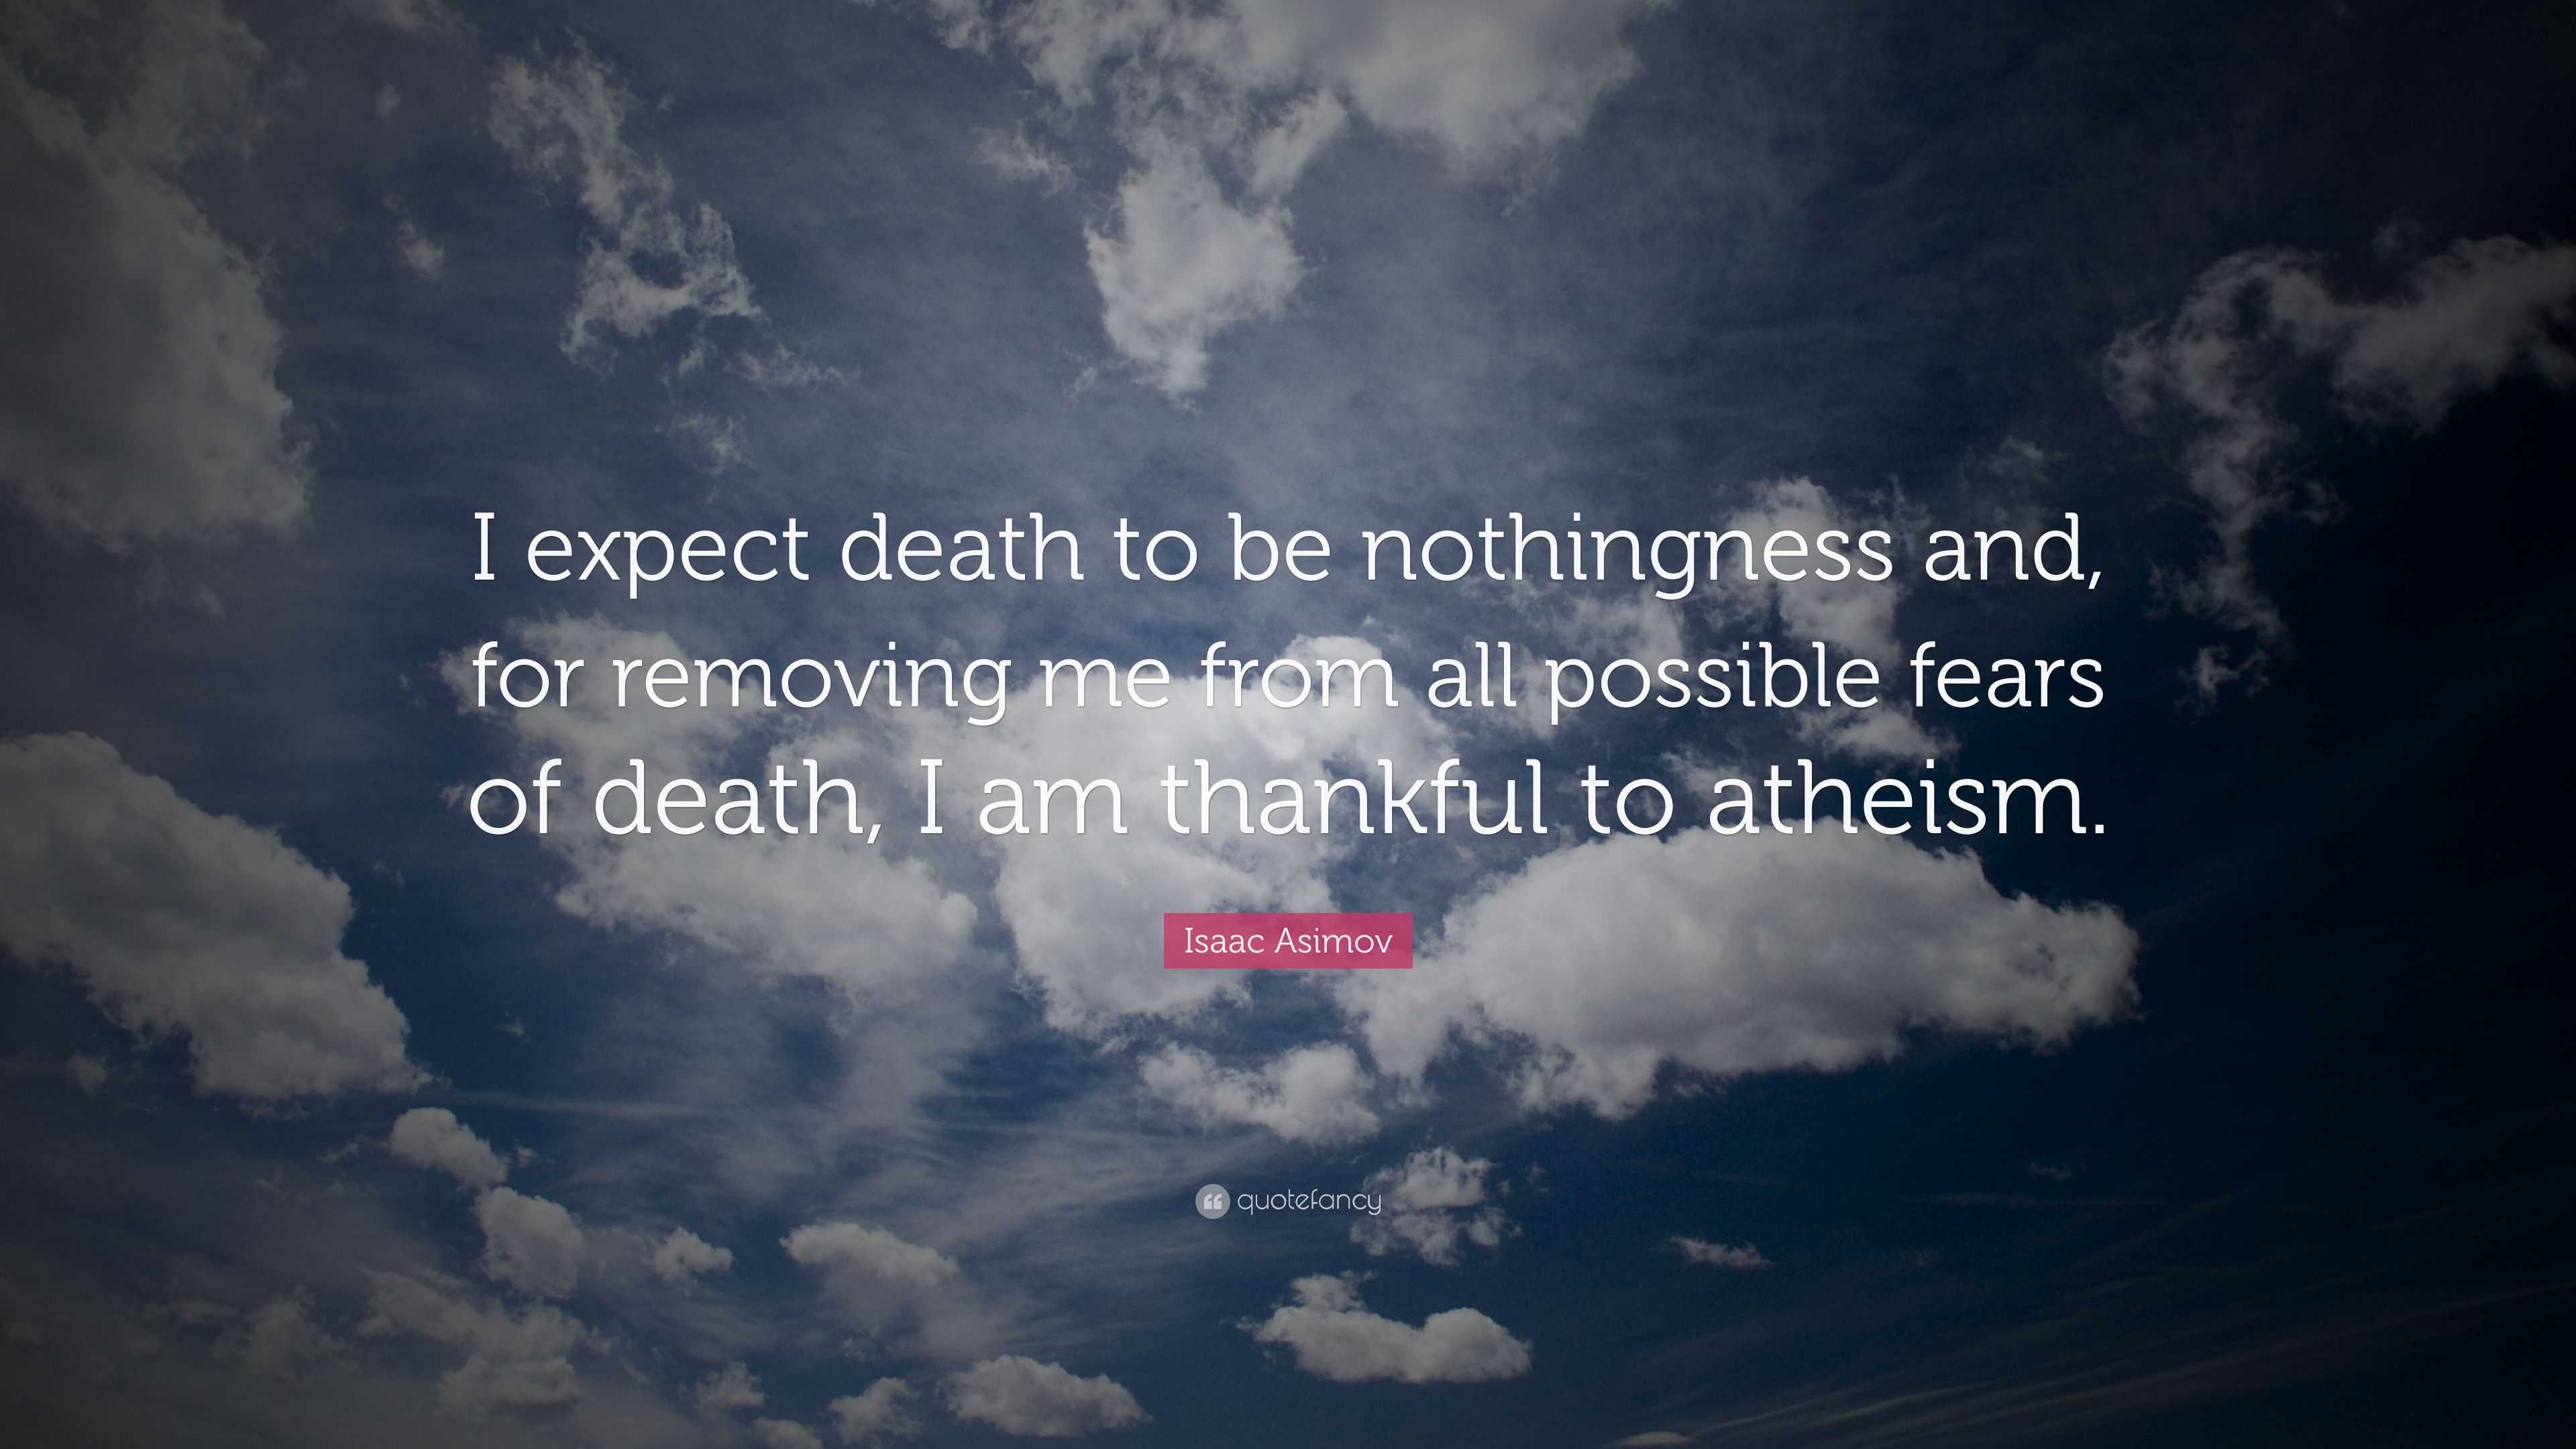 Isaac Asimov Quote: “I expect death to be nothingness and, for removing ...